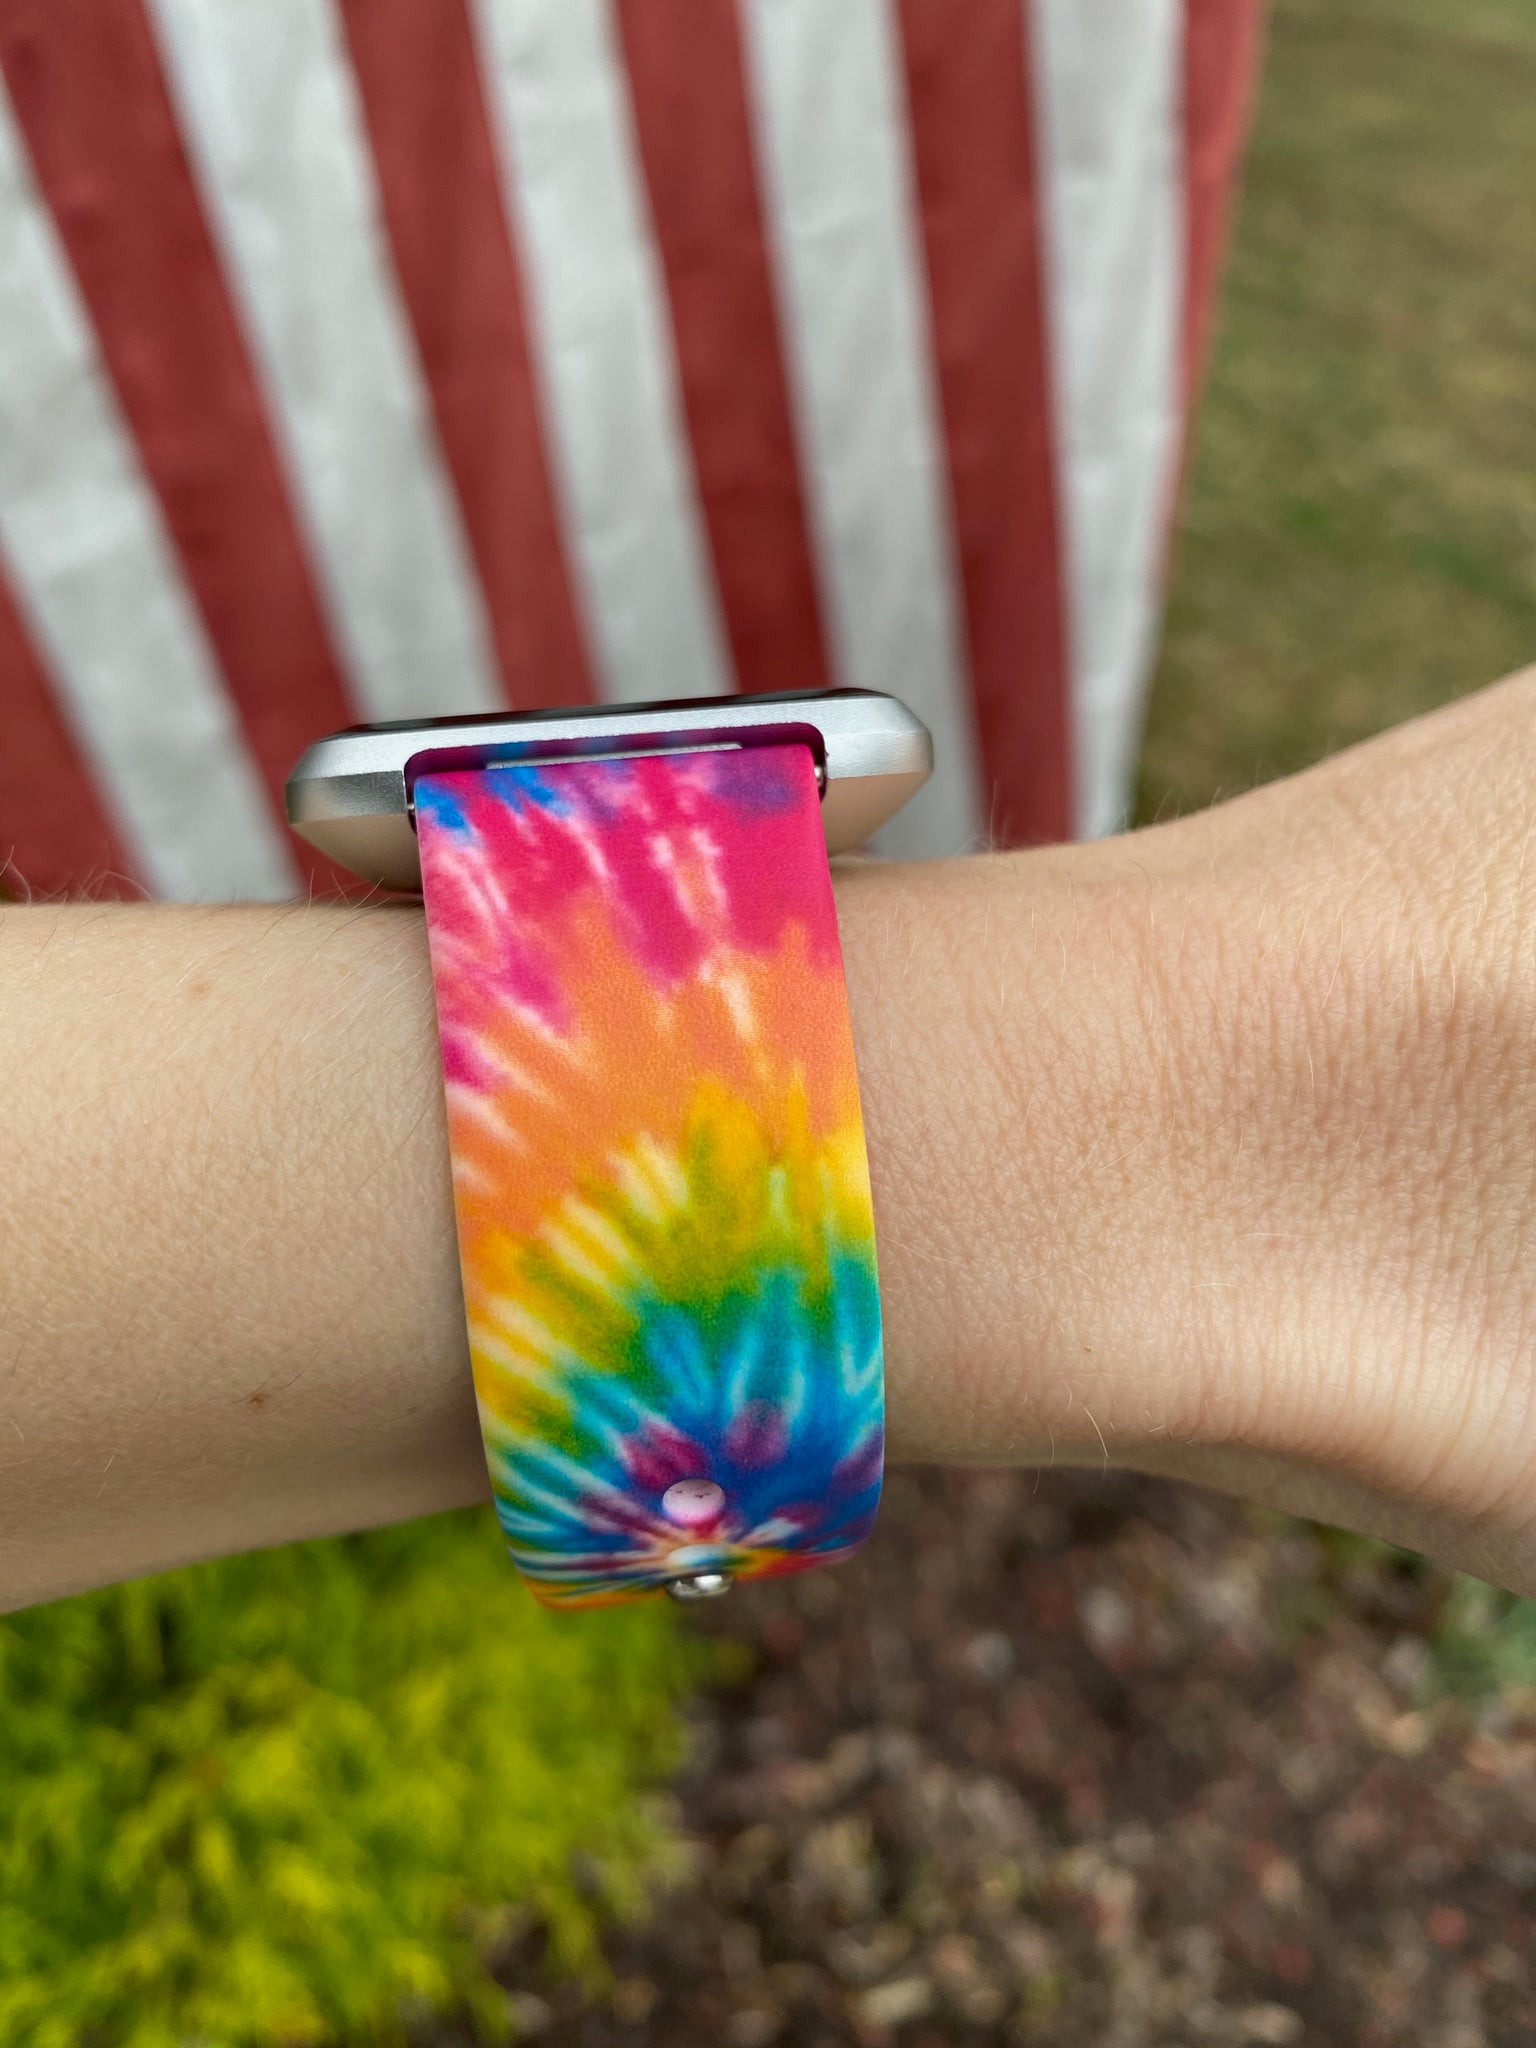 Blue Swirl Tie Dye Silicone Band for Fitbit Versa